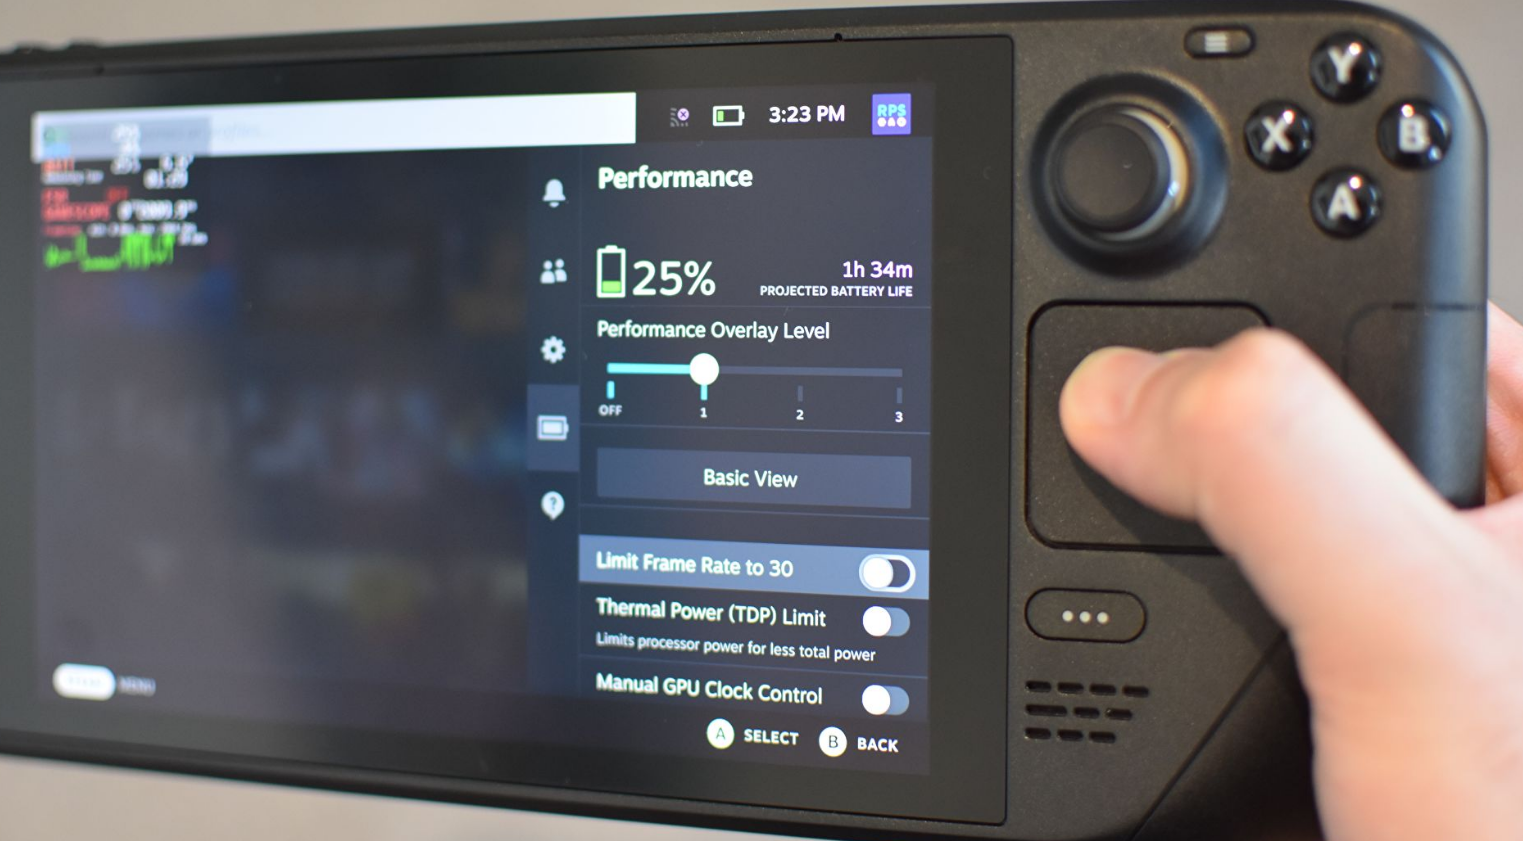 The Steam Deck offers tons of settings to balance performance and battery life